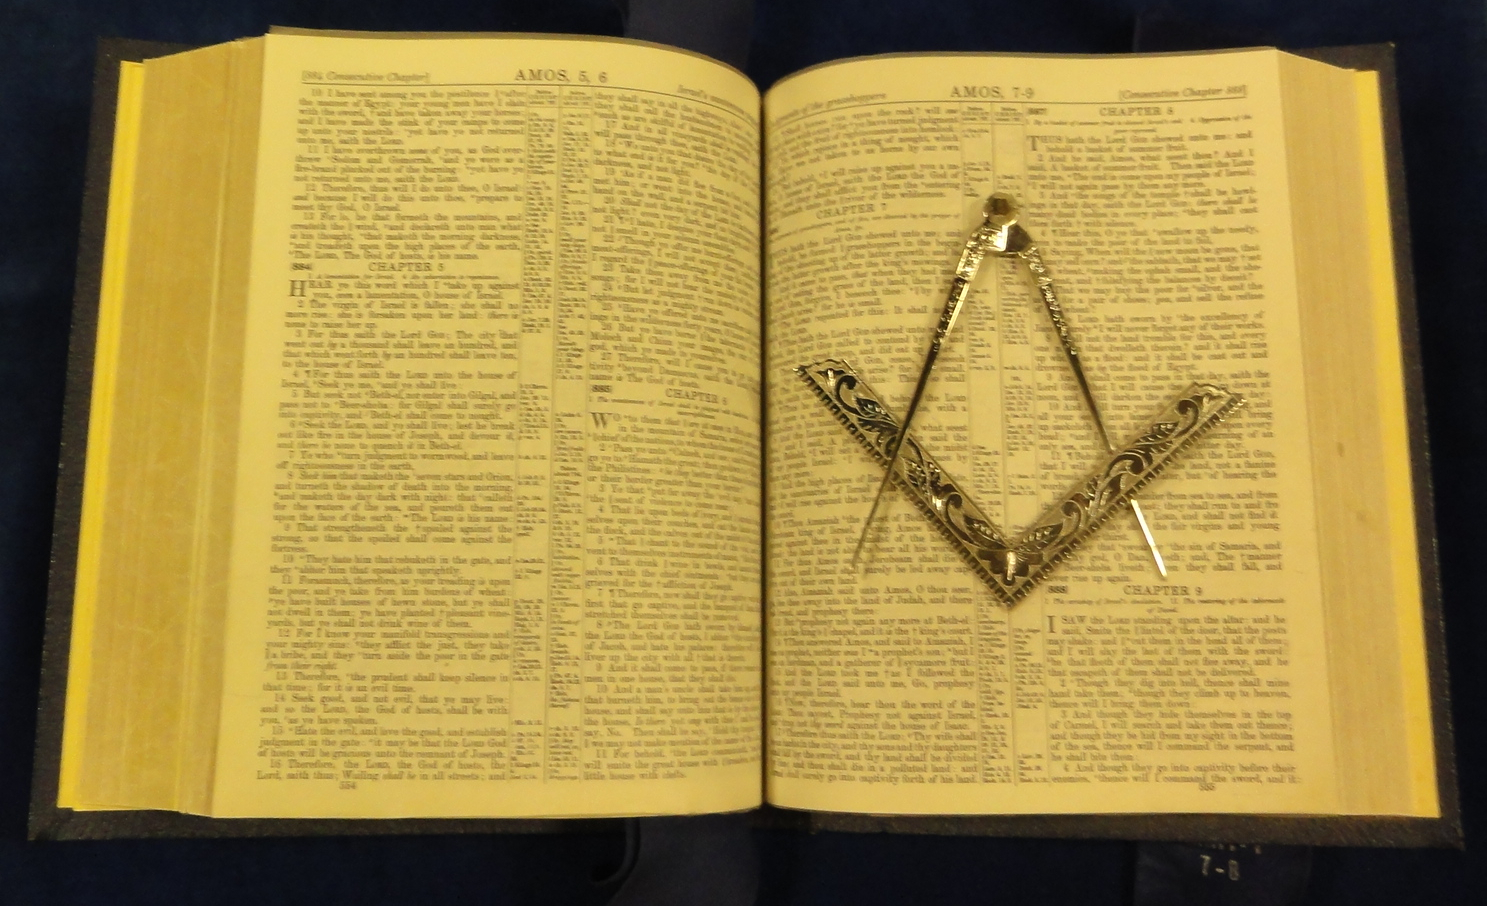 Holy Bible, Square, and Compass, arranged for the second degree in the Book of Amos.